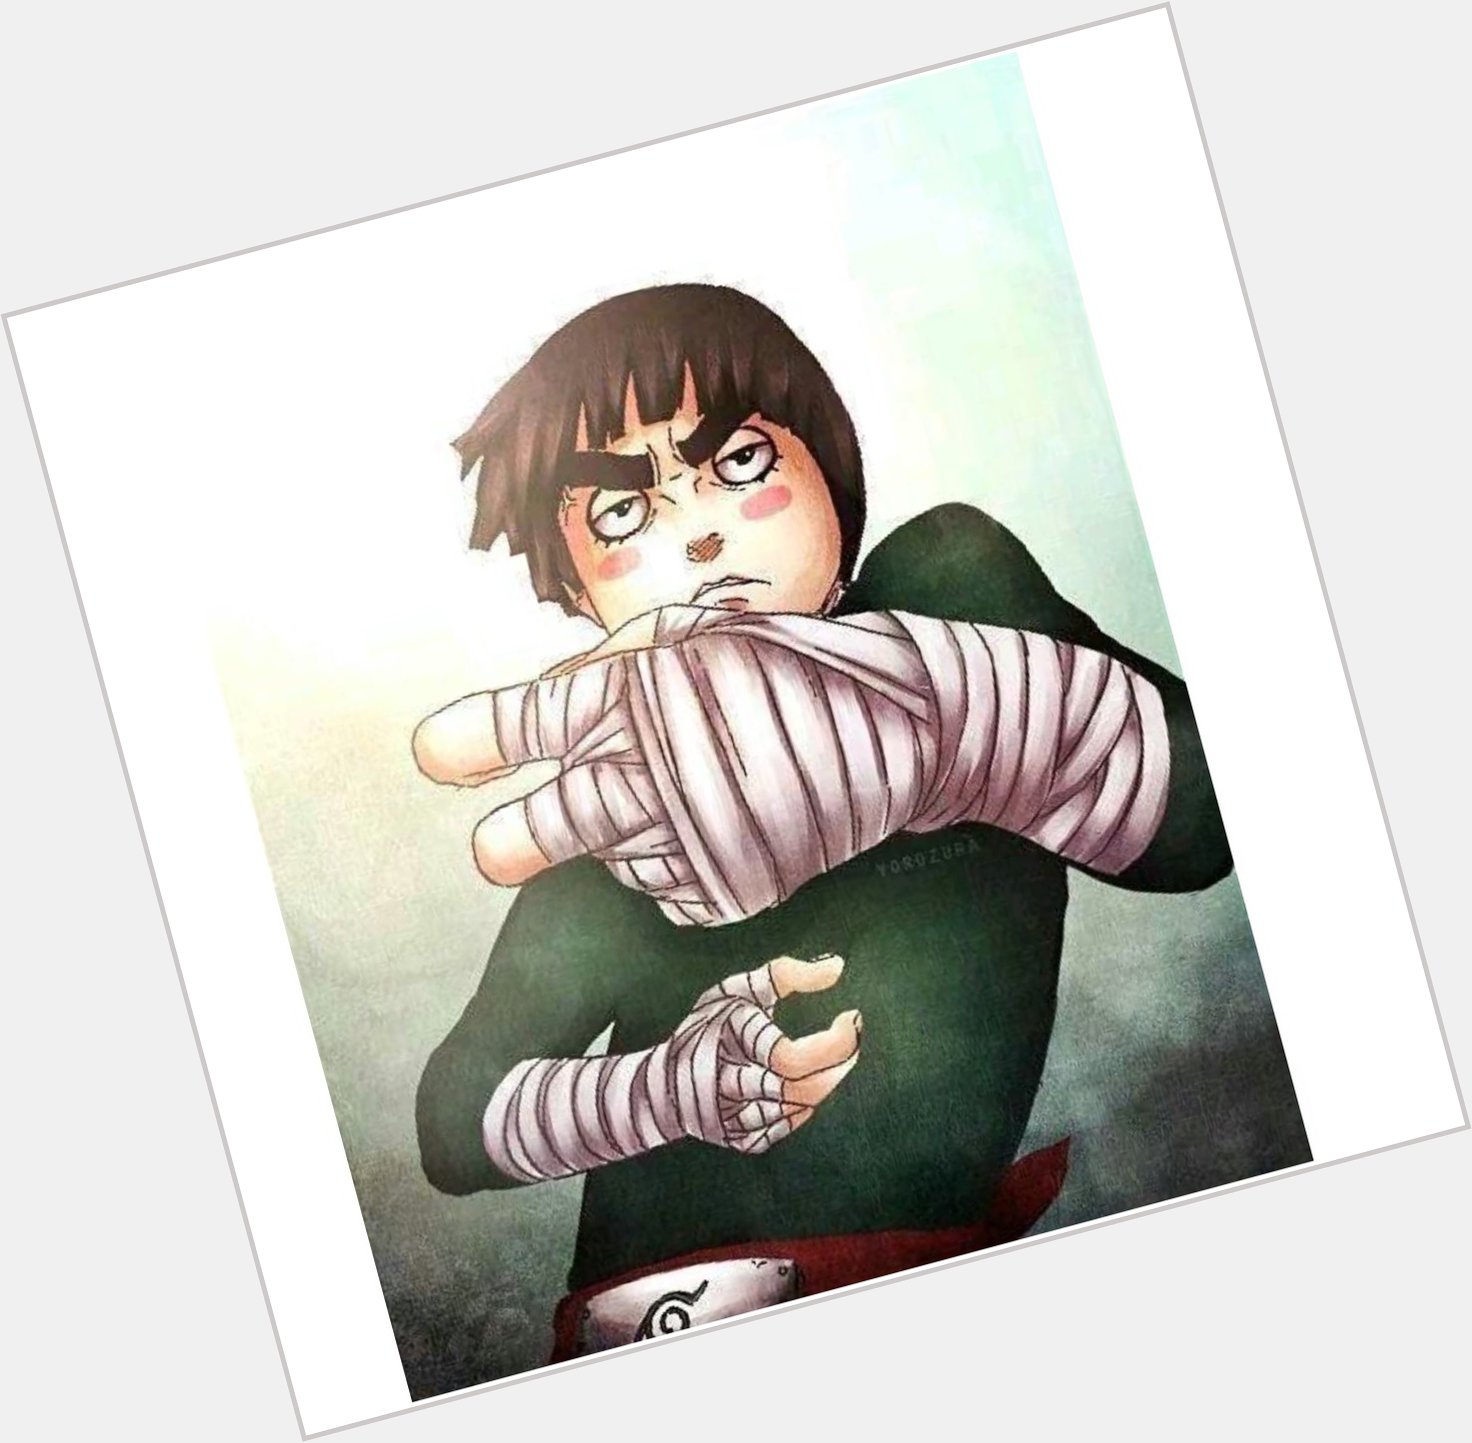 OFF THE HENNY ROCK LEE ,
Happy birthday you legend  
Such an adorable character uwu   